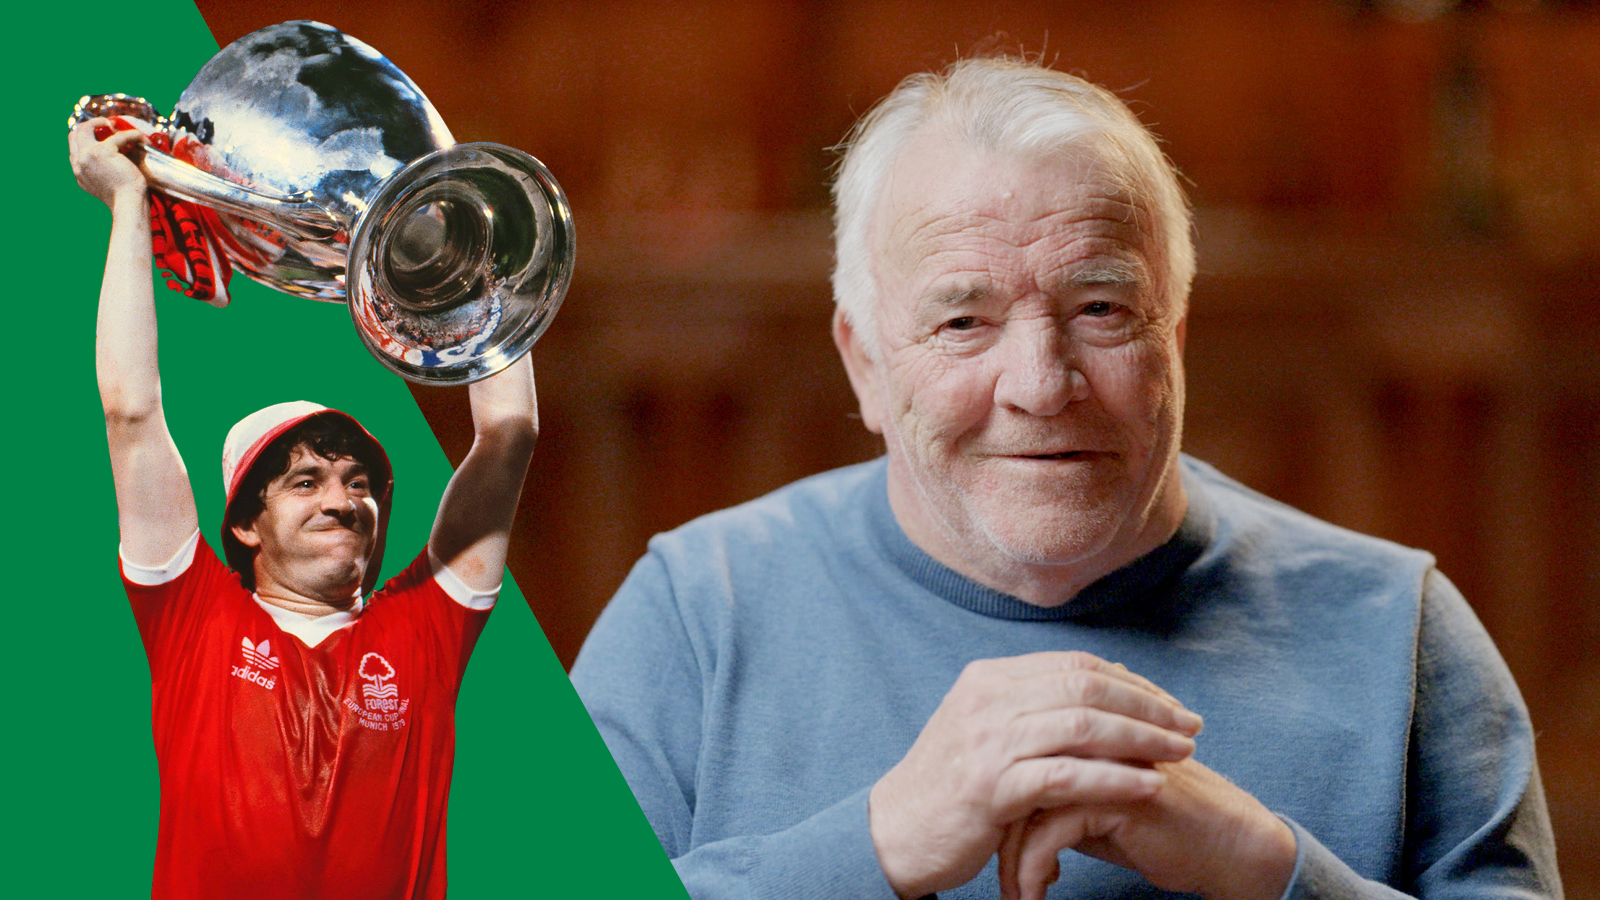 Robertson is now 71 and has Parkinson’s but recalls his successful playing days, left, fondly